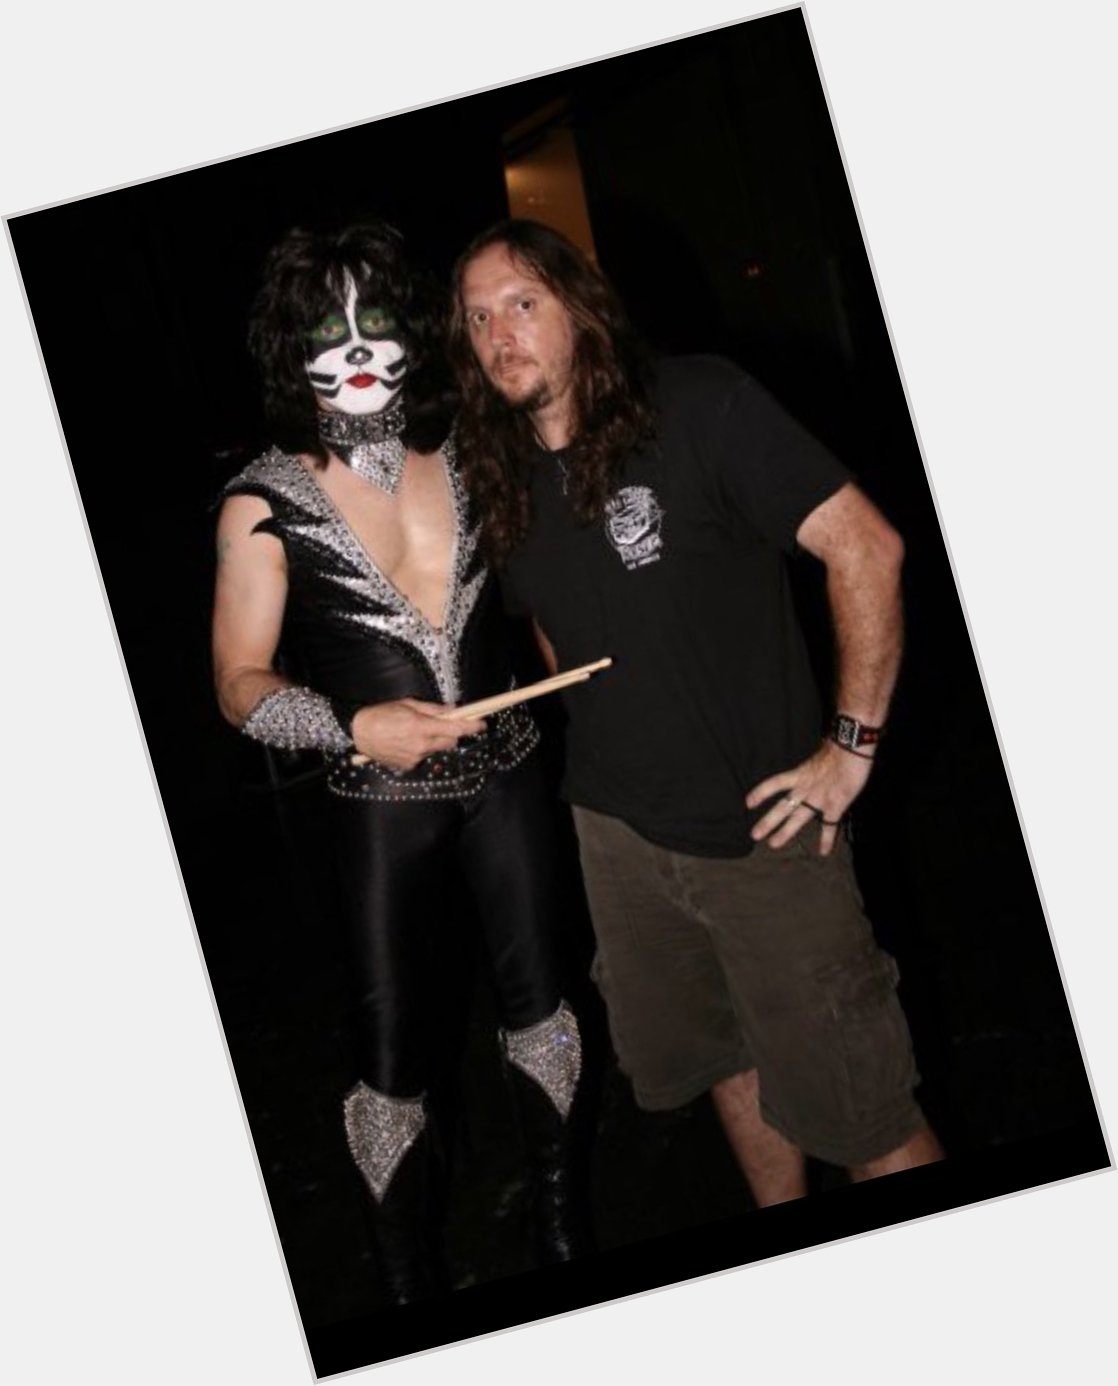 May 12 - Happy Birthday to my old friend and boss, Eric Singer 